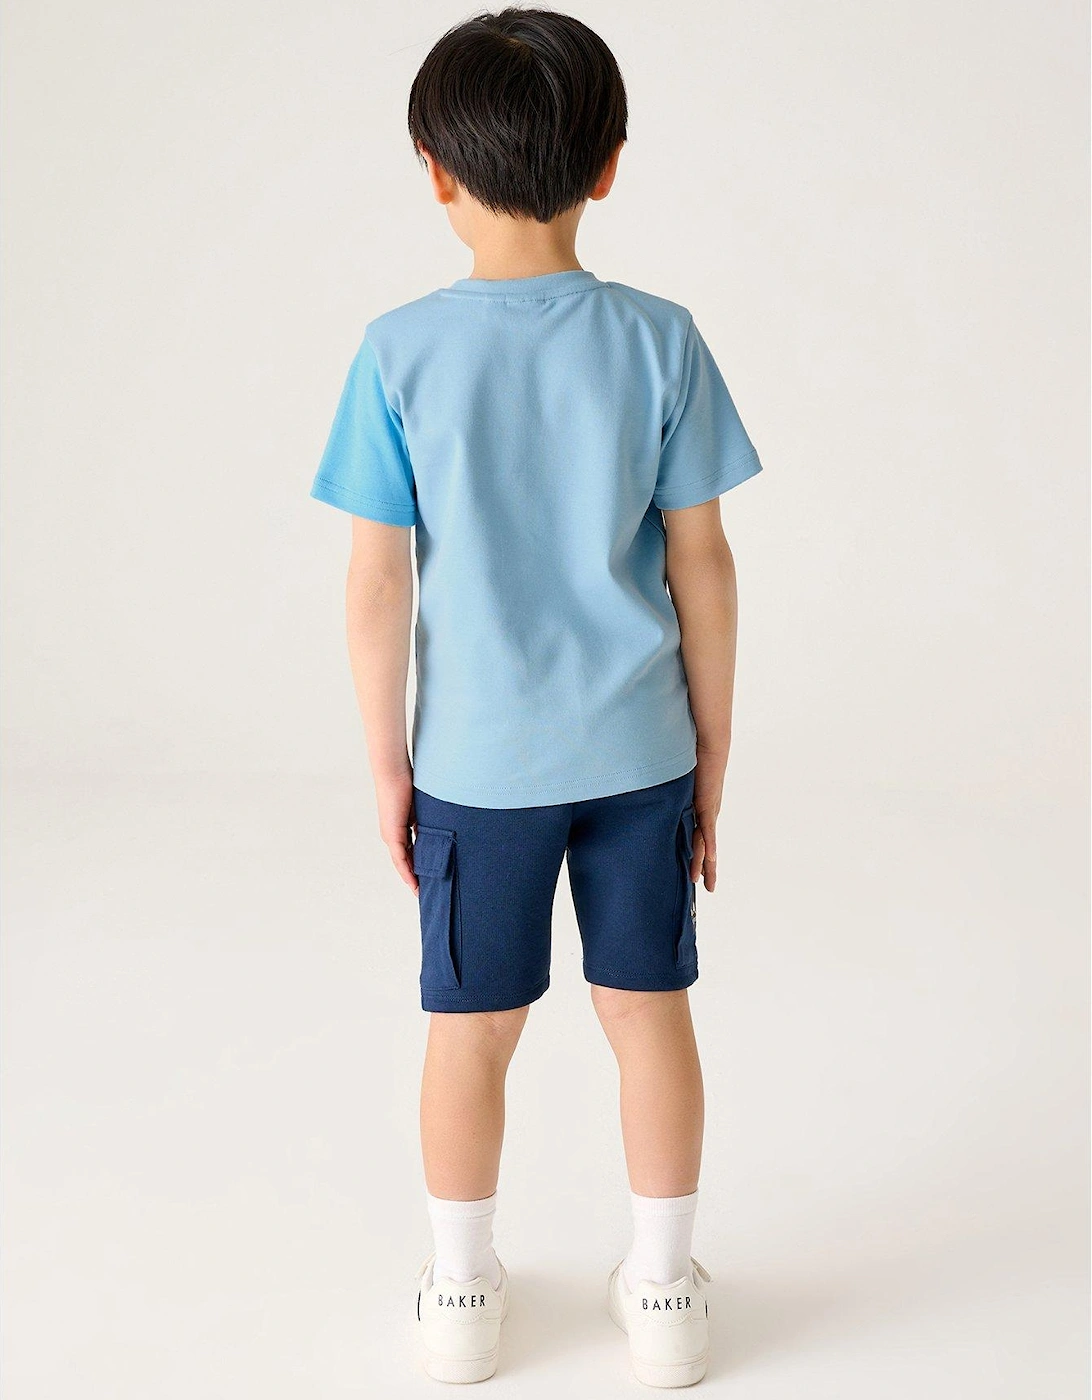 BAKER BY PANEL BLUE TEE